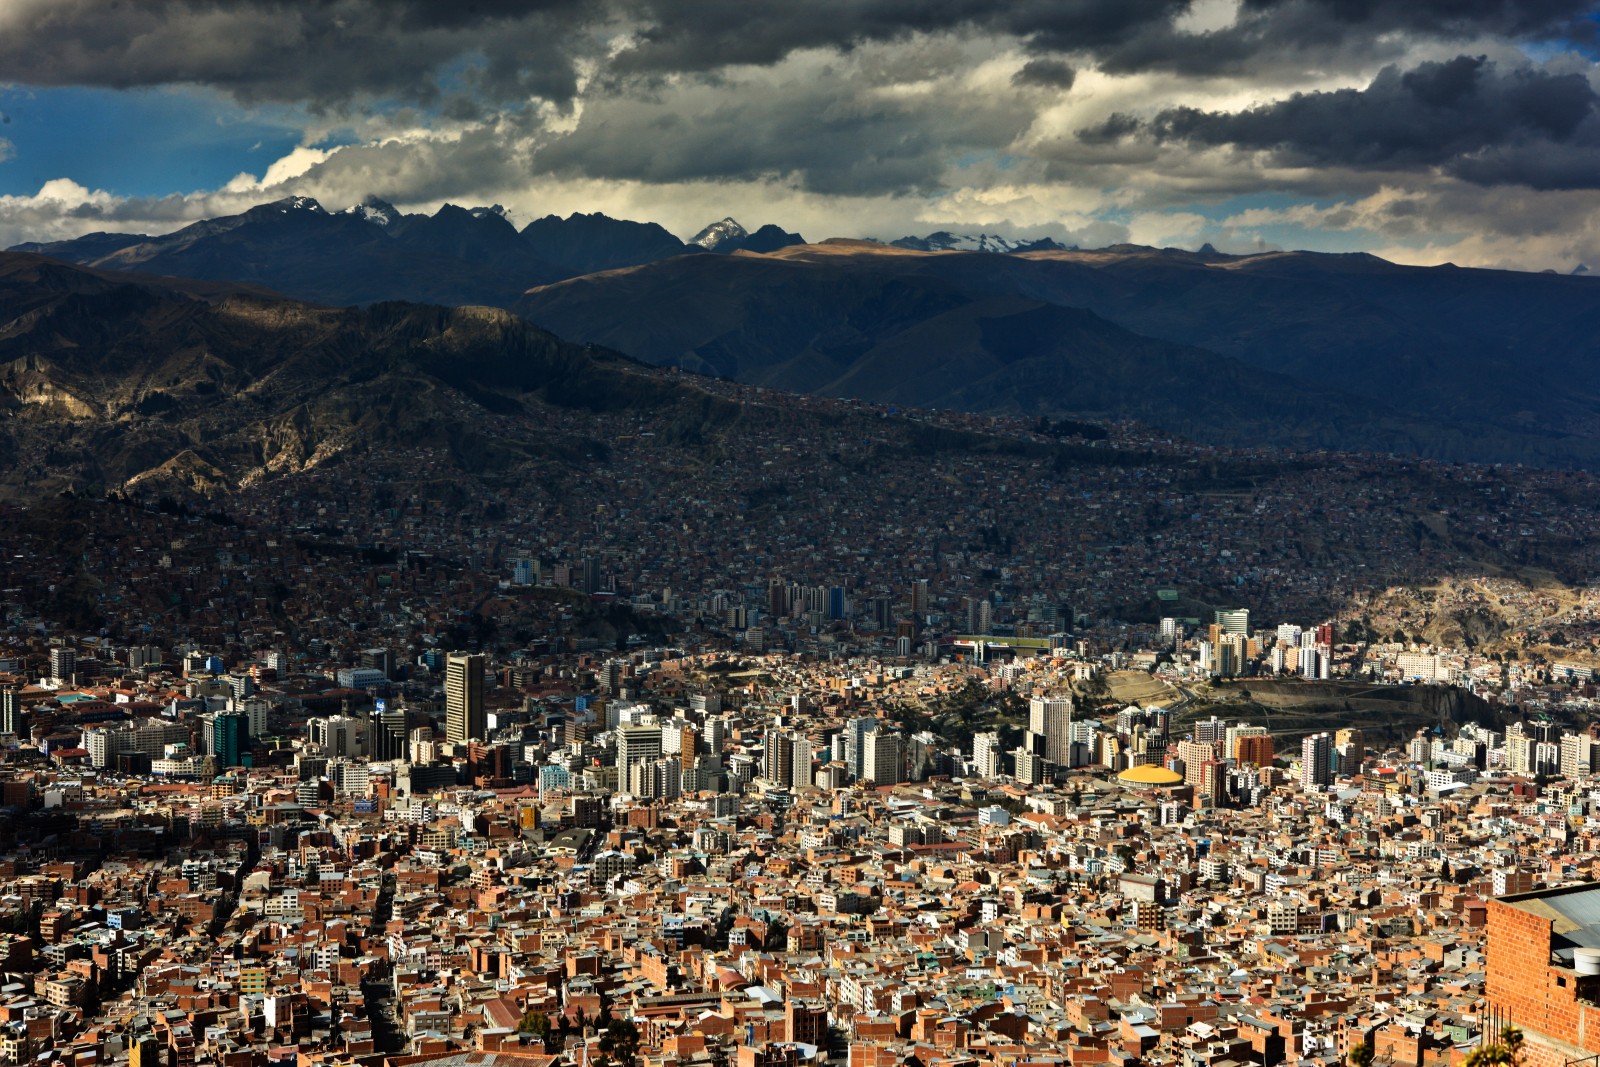 Water shortages in Bolivia forced officials to begin rationing supplies in La Paz, a metropolitan area home to more than 2 million people. Photo courtesy Cliff Hellis / Flickr Creative Commons.